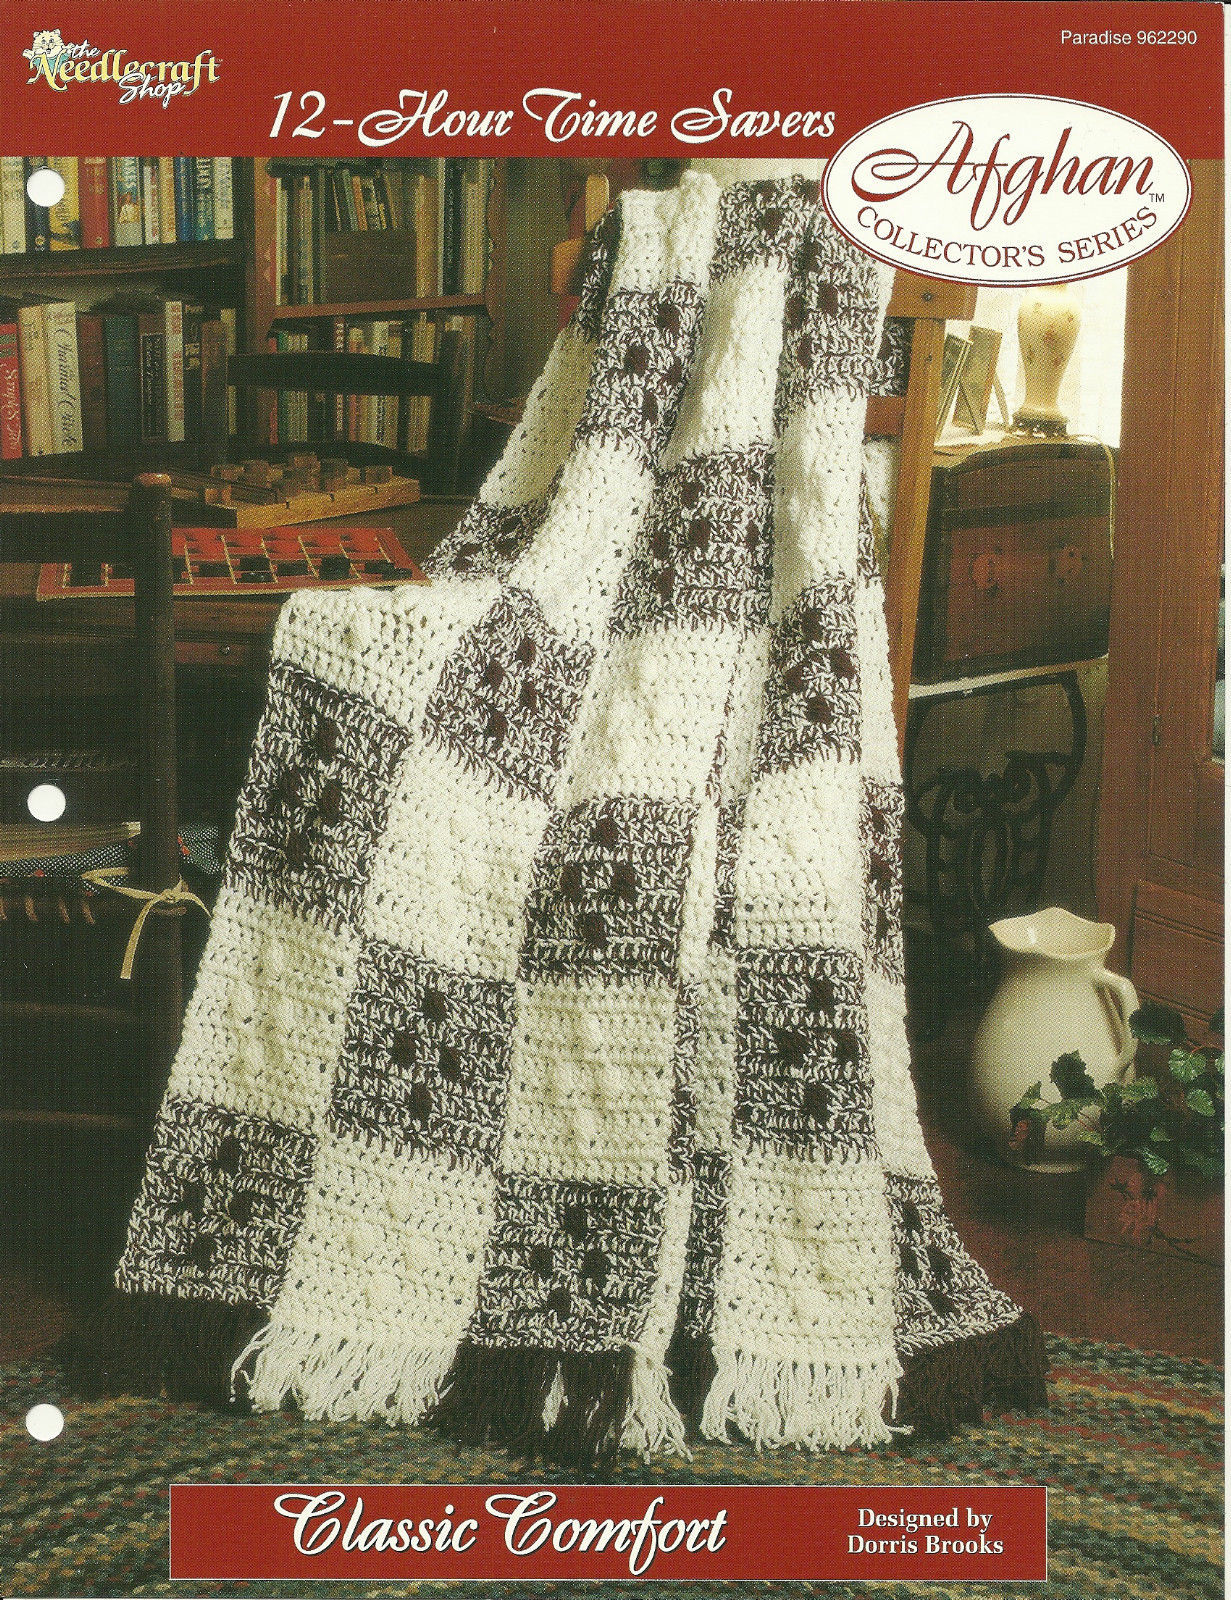 Primary image for Needlecraft Shop Crochet Pattern 962290 Classic Comfort Afghan Collectors Series